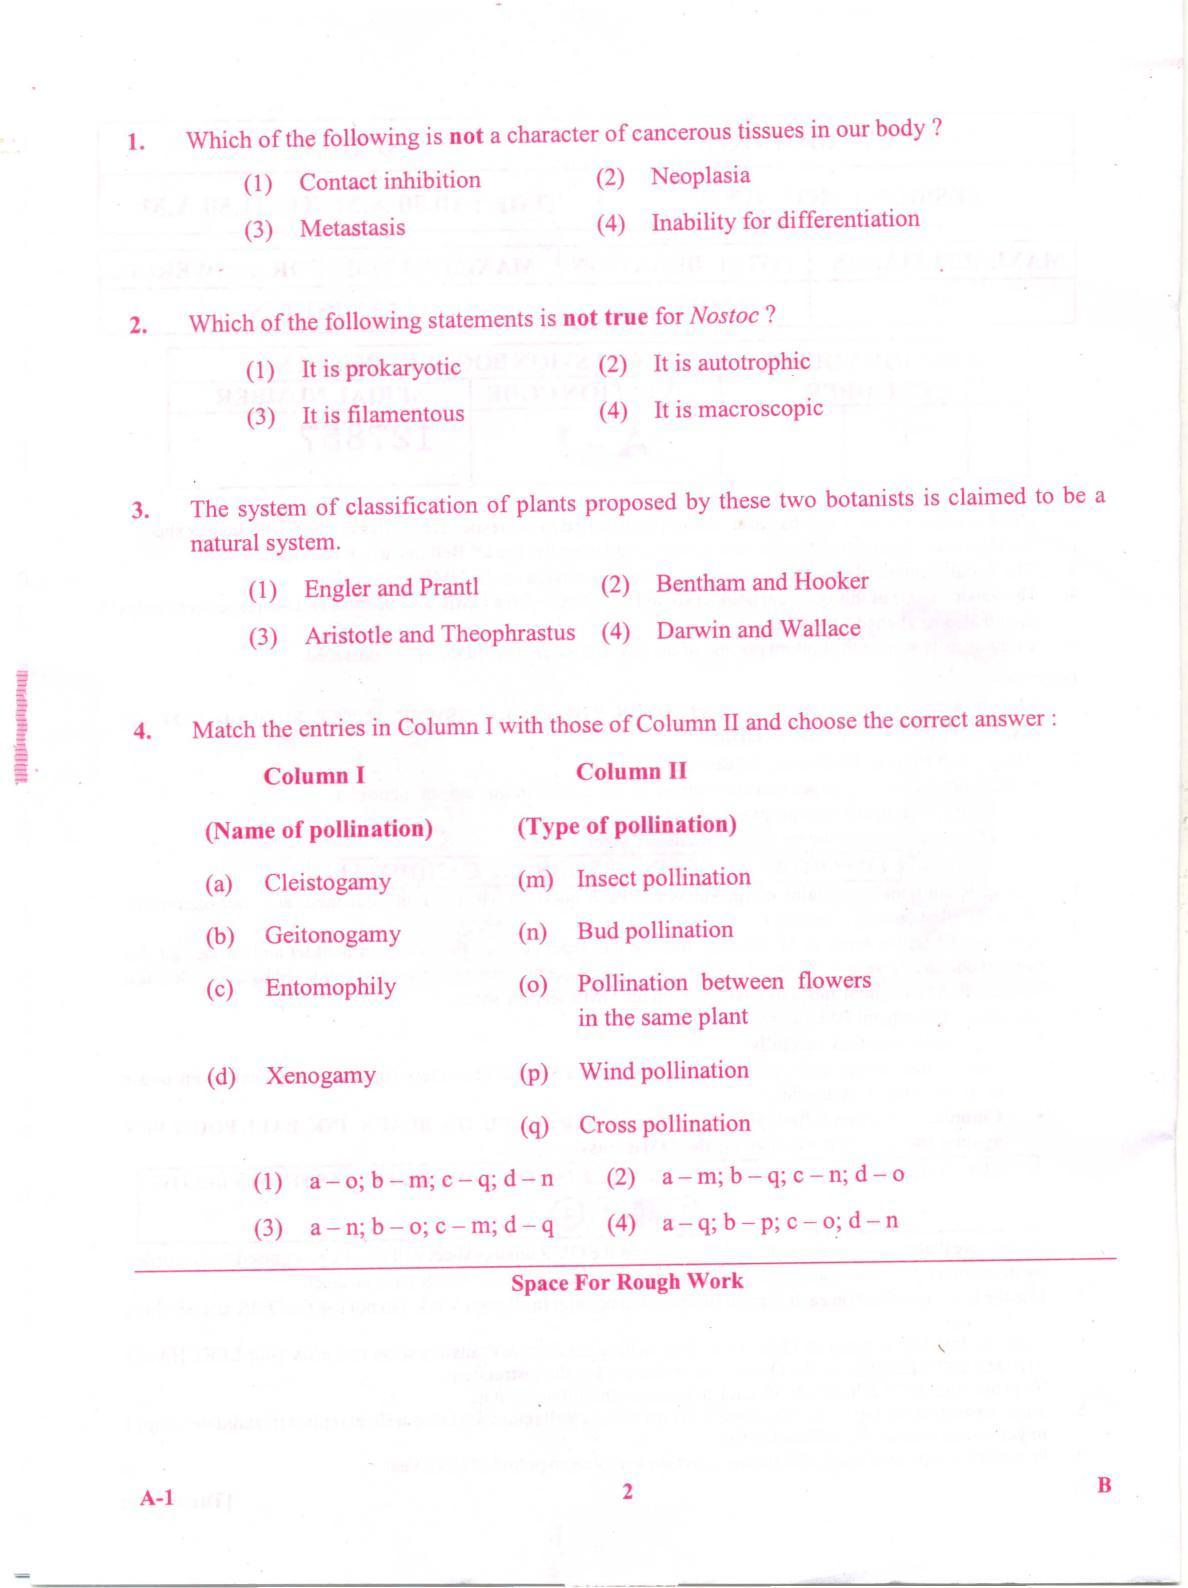 KCET Biology 2012 Question Papers - Page 2